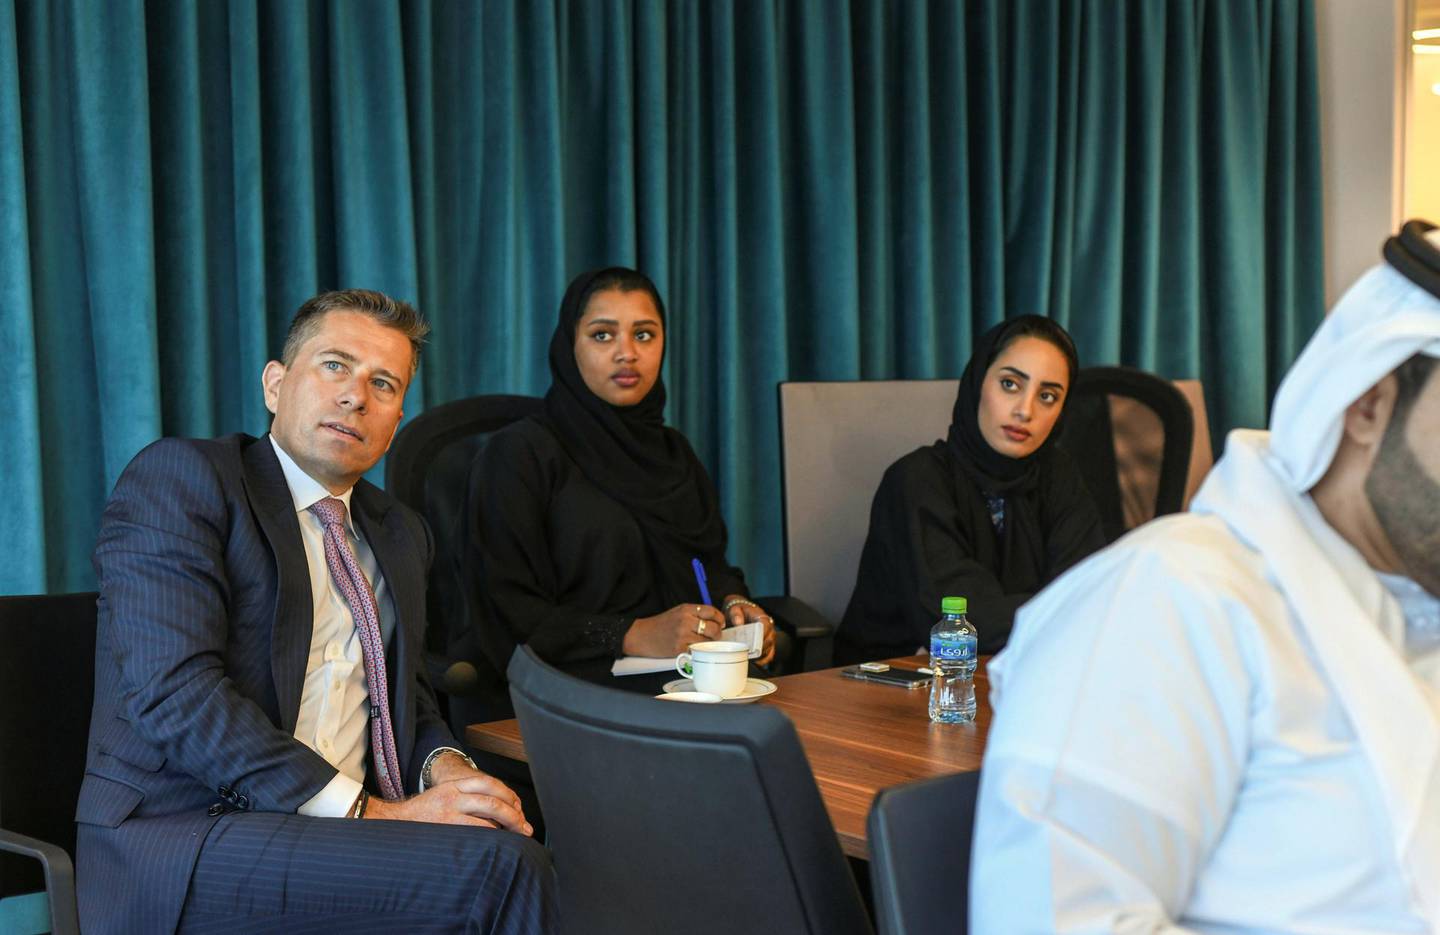 Abu Dhabi, United Arab Emirates - Group of students from Emirates Diplomatic Academy for Q&A with Editor-in-Chief of The National, Mina Al Oraibi on December 10, 2018. (Khushnum Bhandari/ The National)
